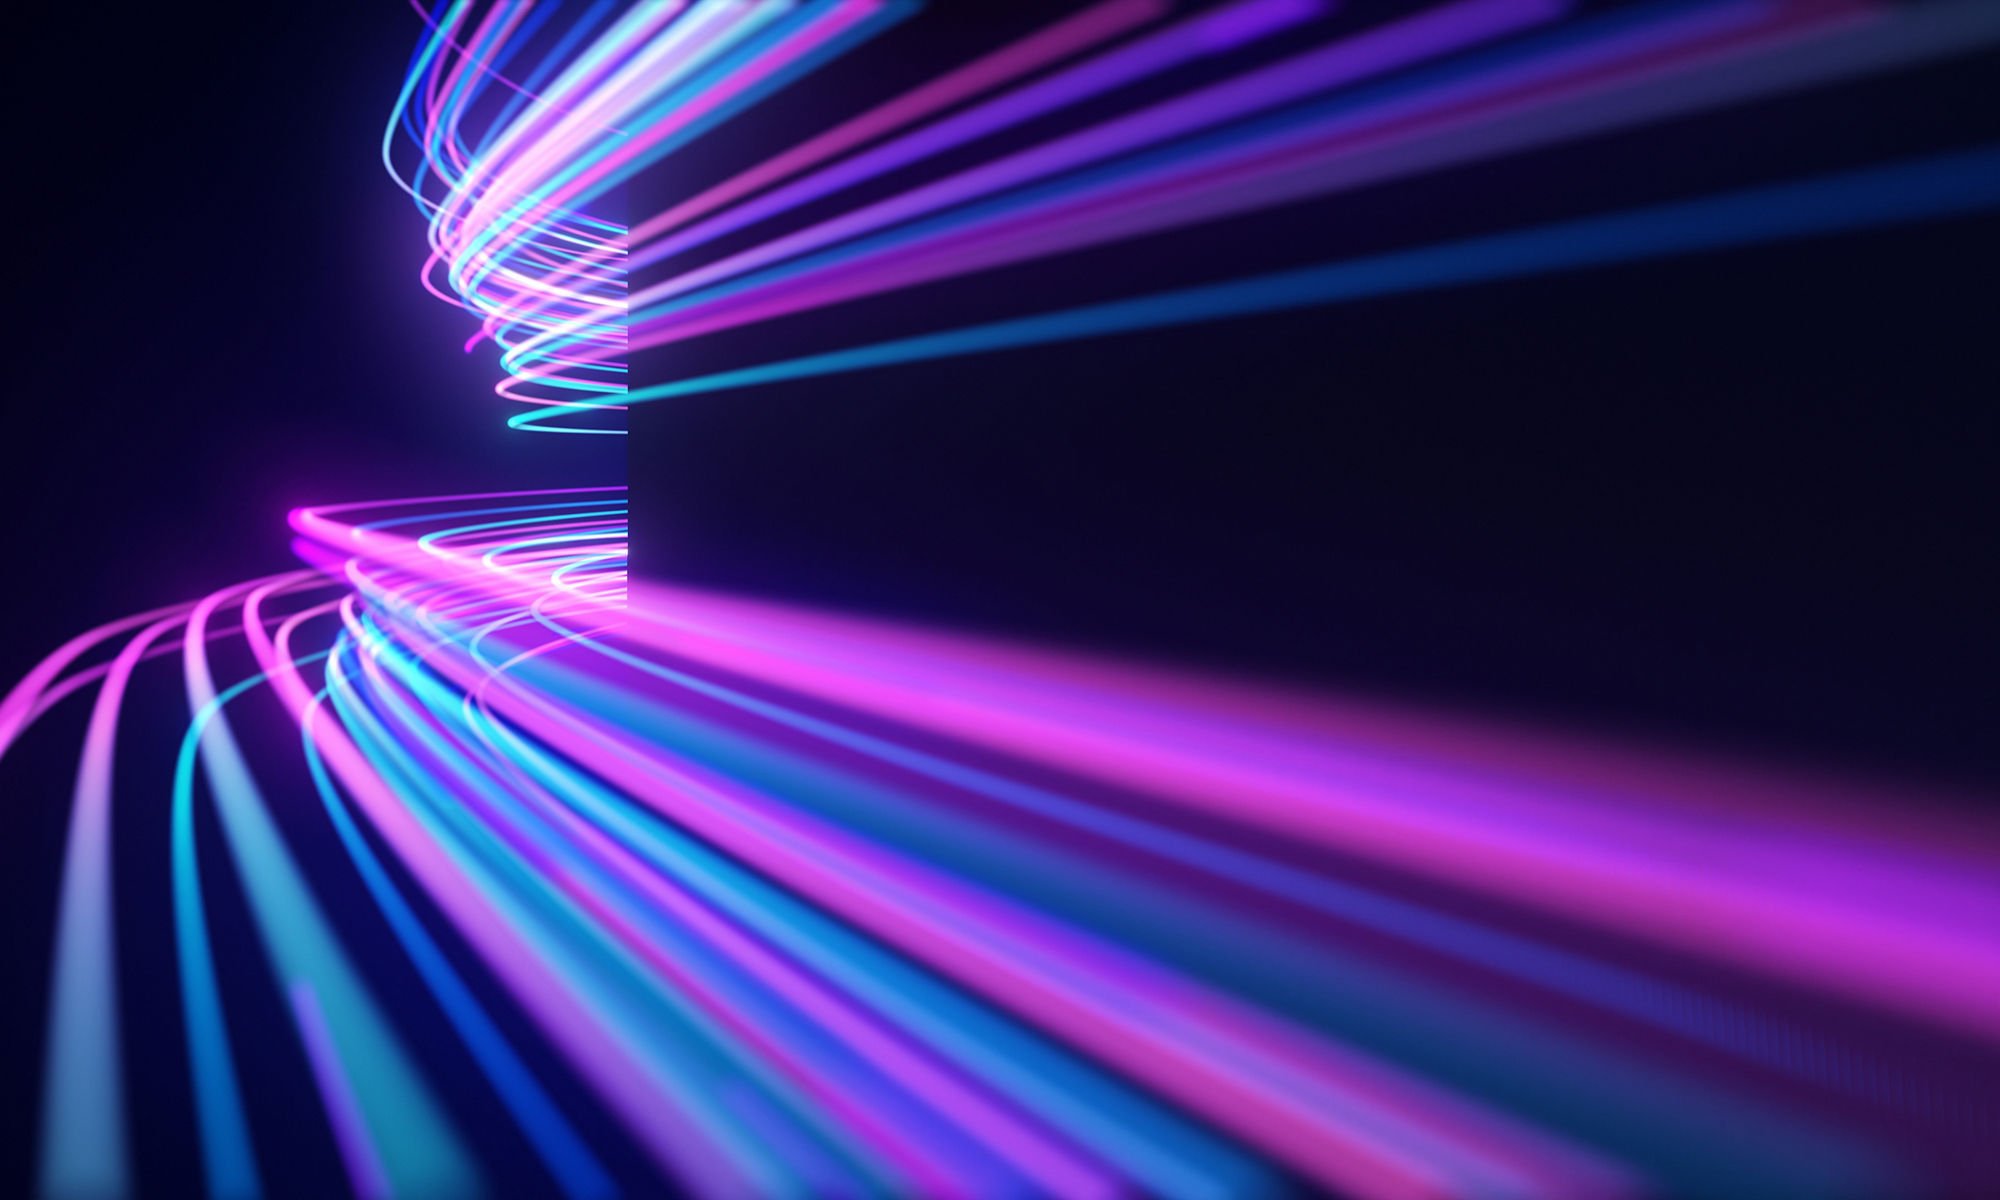 Abstract neon light streaks in pink and blue moving around a corner with black walls